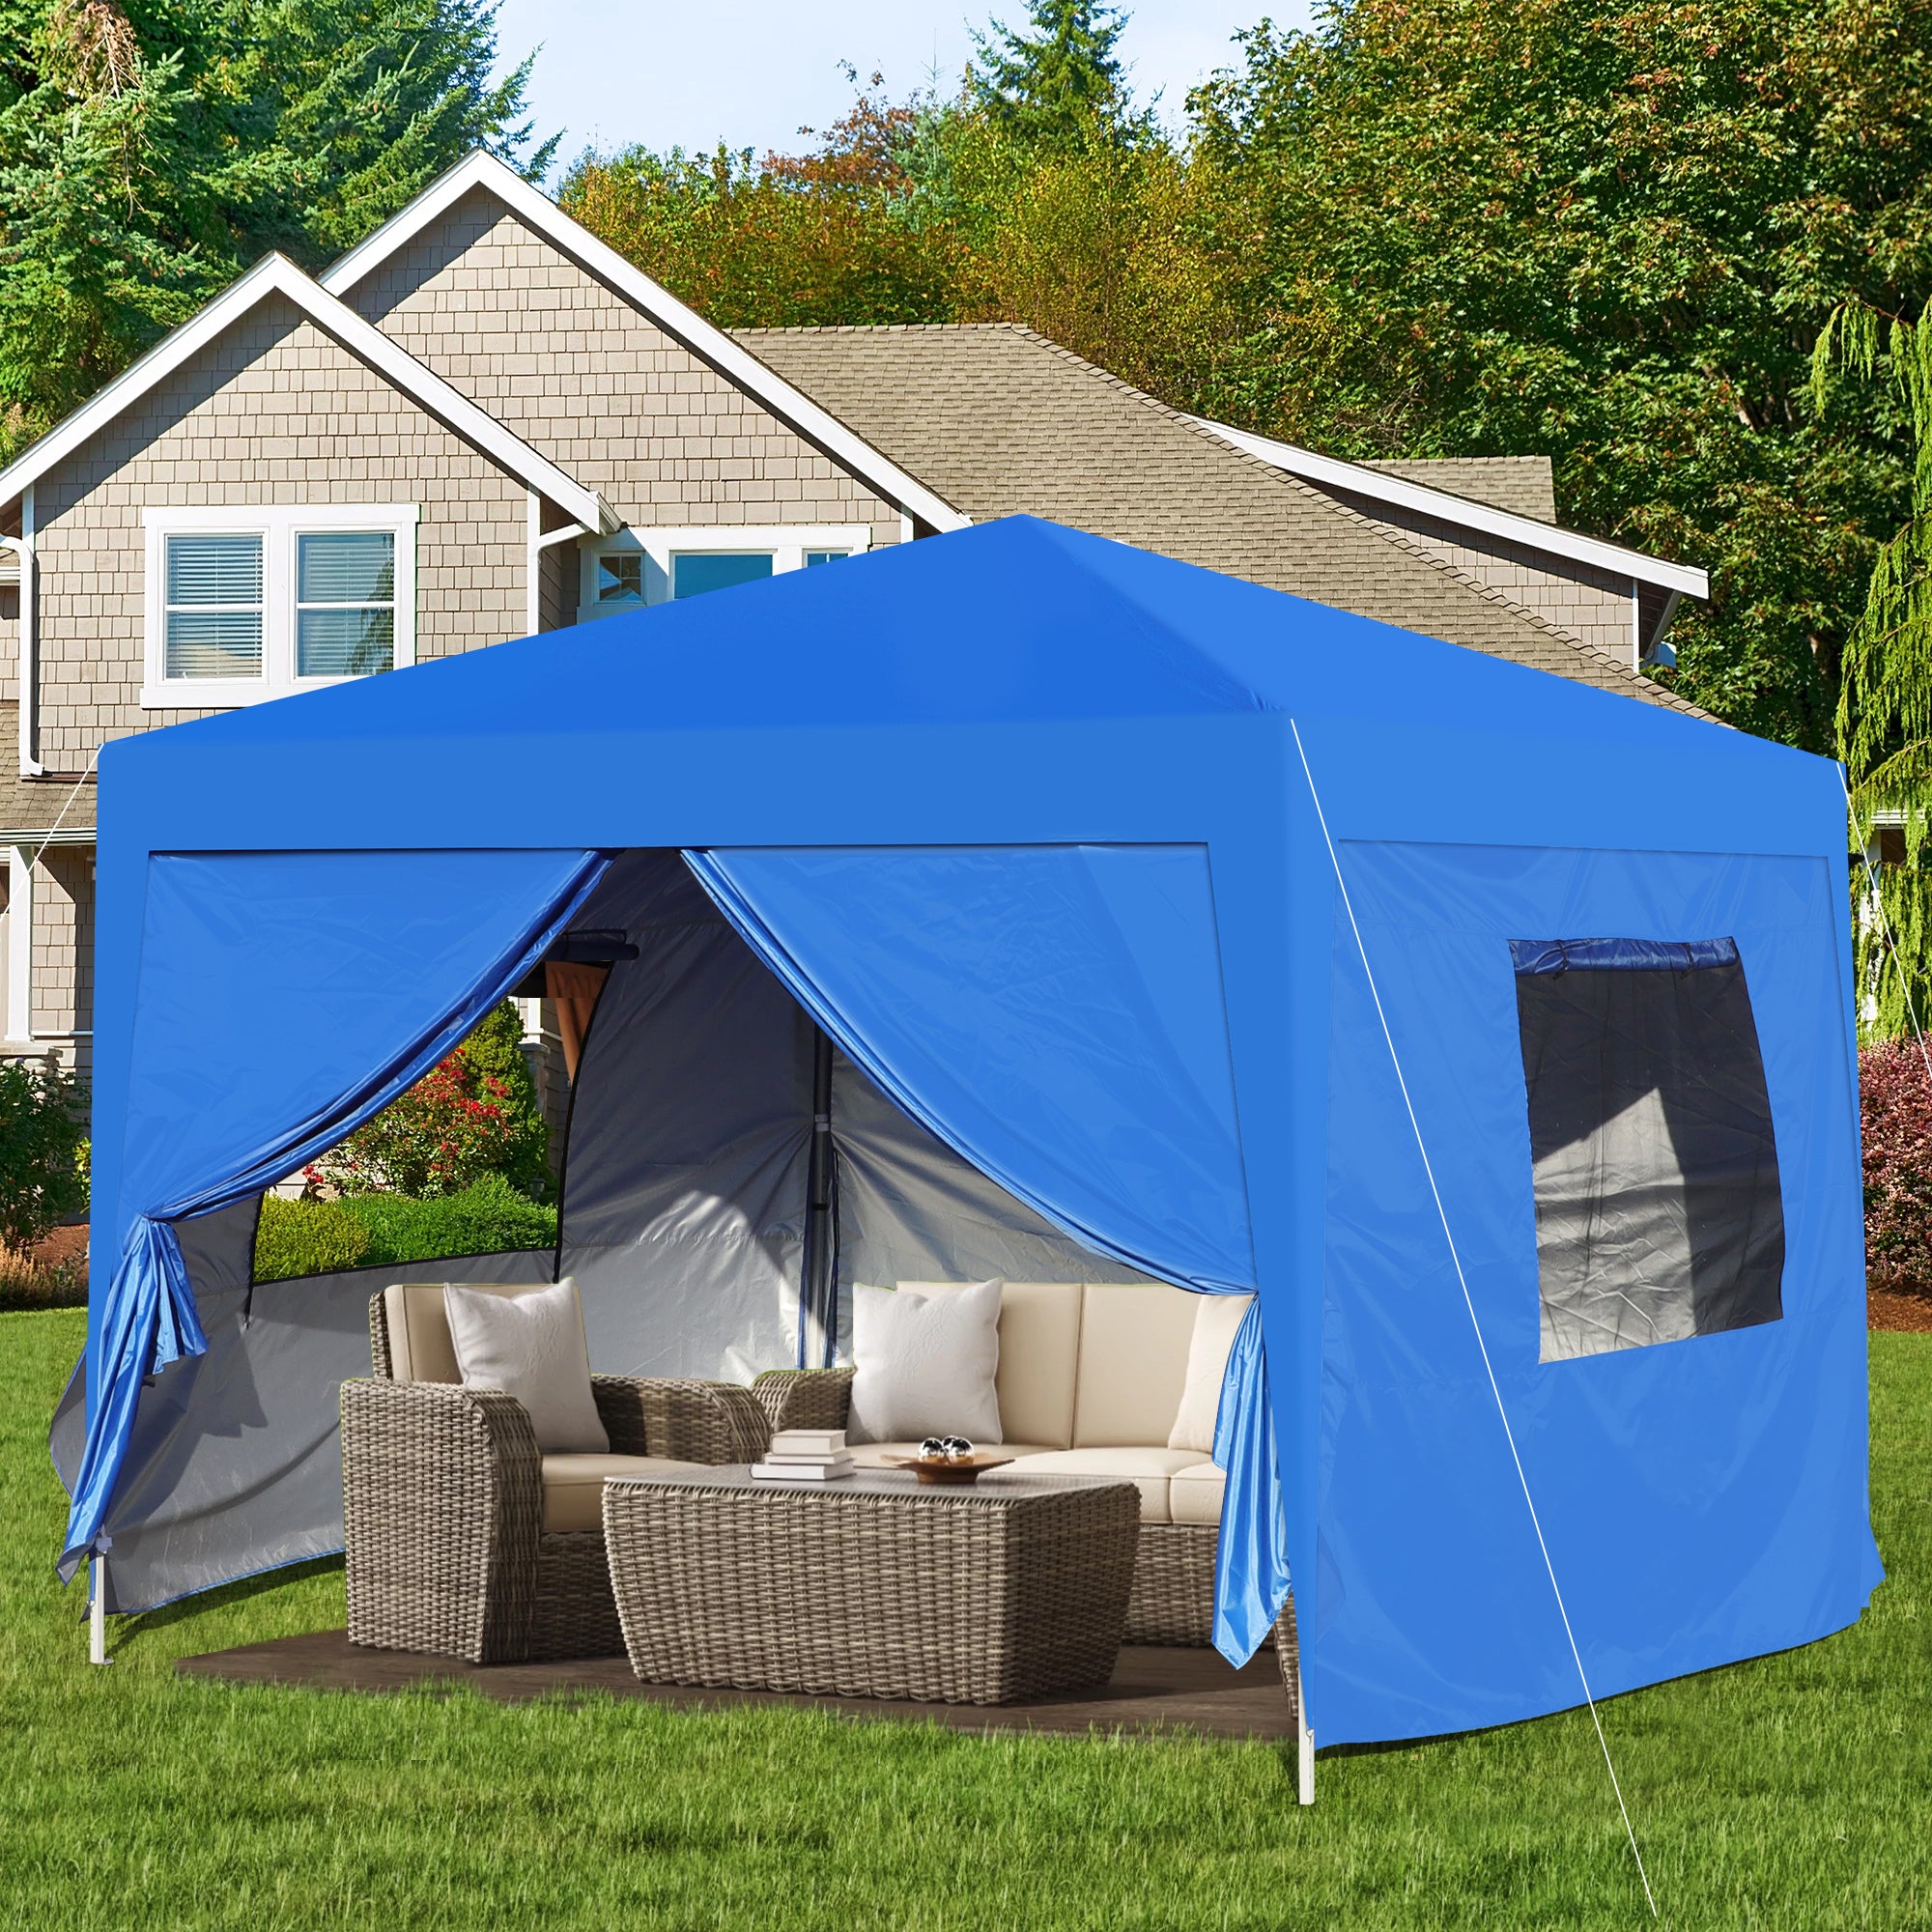 Outdoor 10x 10Ft Pop Up Gazebo Canopy Tent with blue-metal